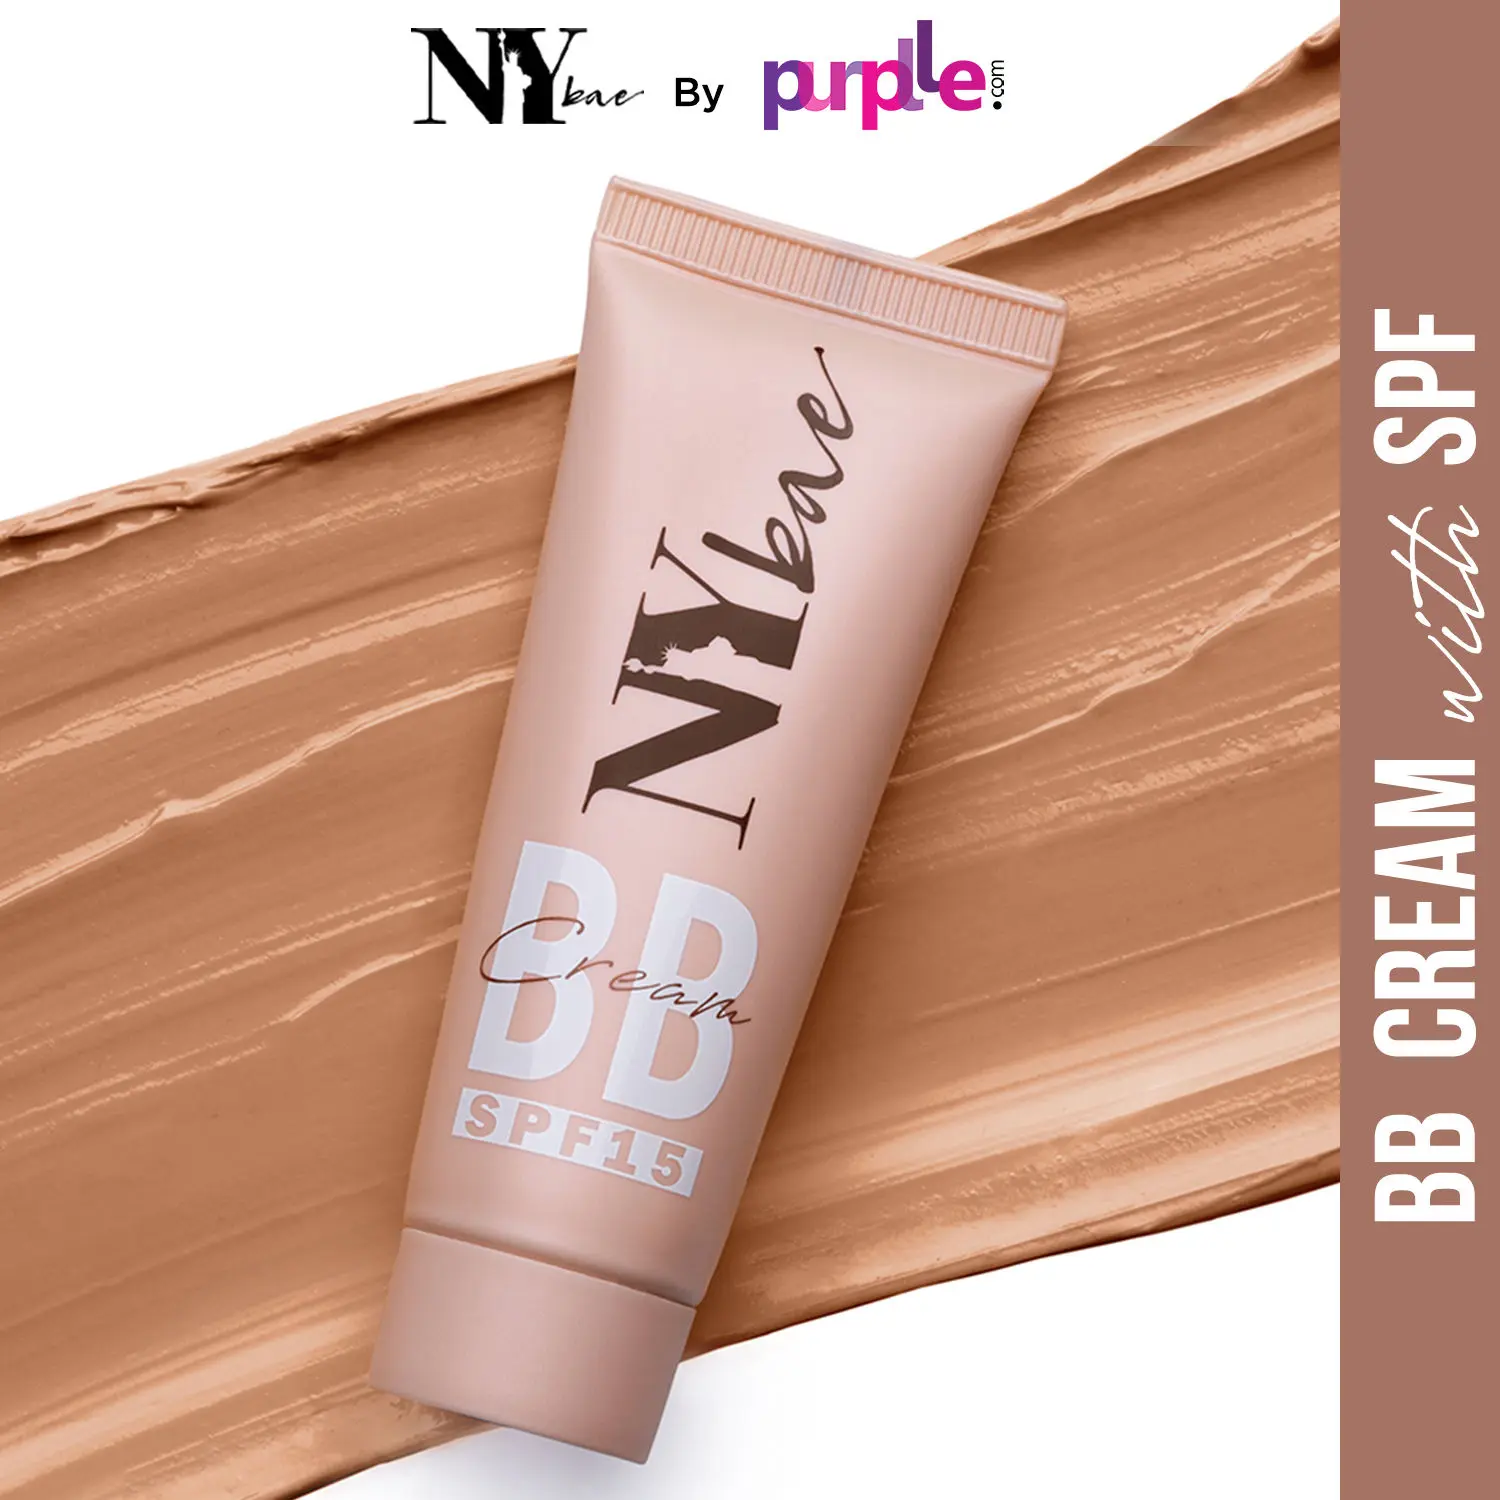 NY Bae BB Cream with SPF 15 - Brown Sugar 06 (25 g) | Wheatish Skin | Cool Undertone | Enriched with Vitamins | Covers Imperfections | UV Protection